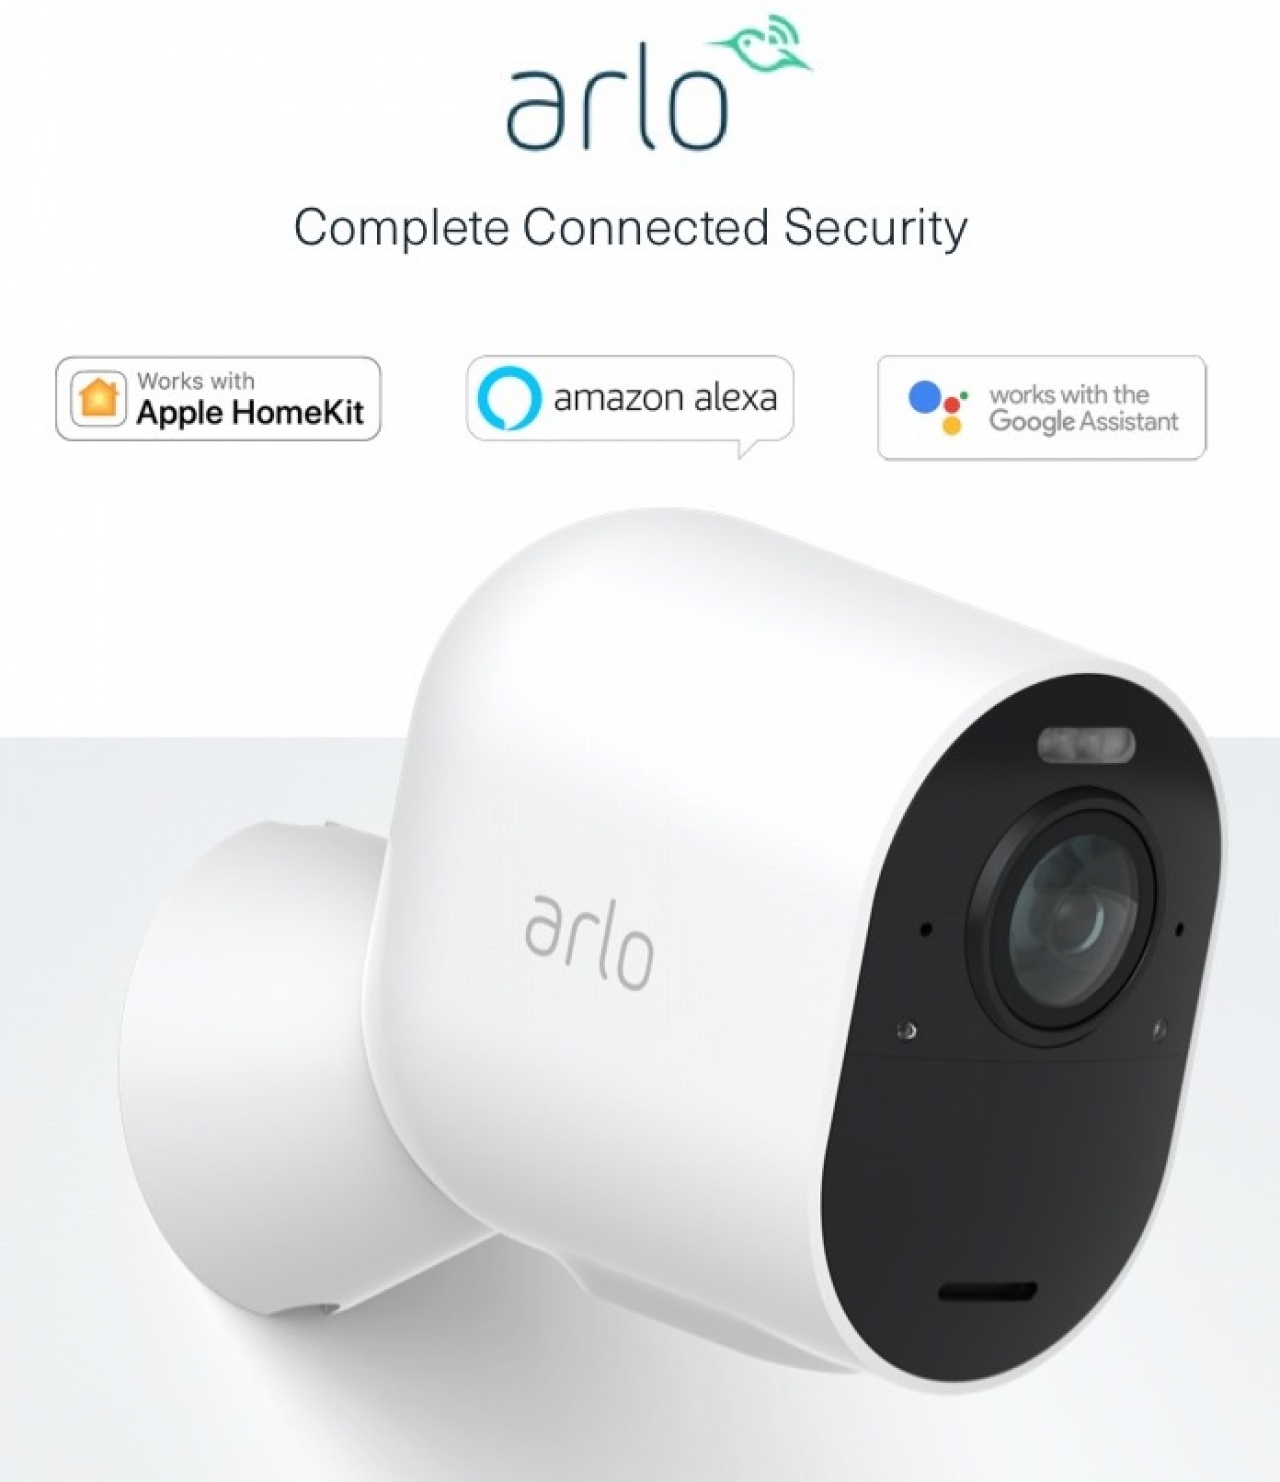 Apple HomeKit is now compatible with Arlo Pro and  - Arlo Community